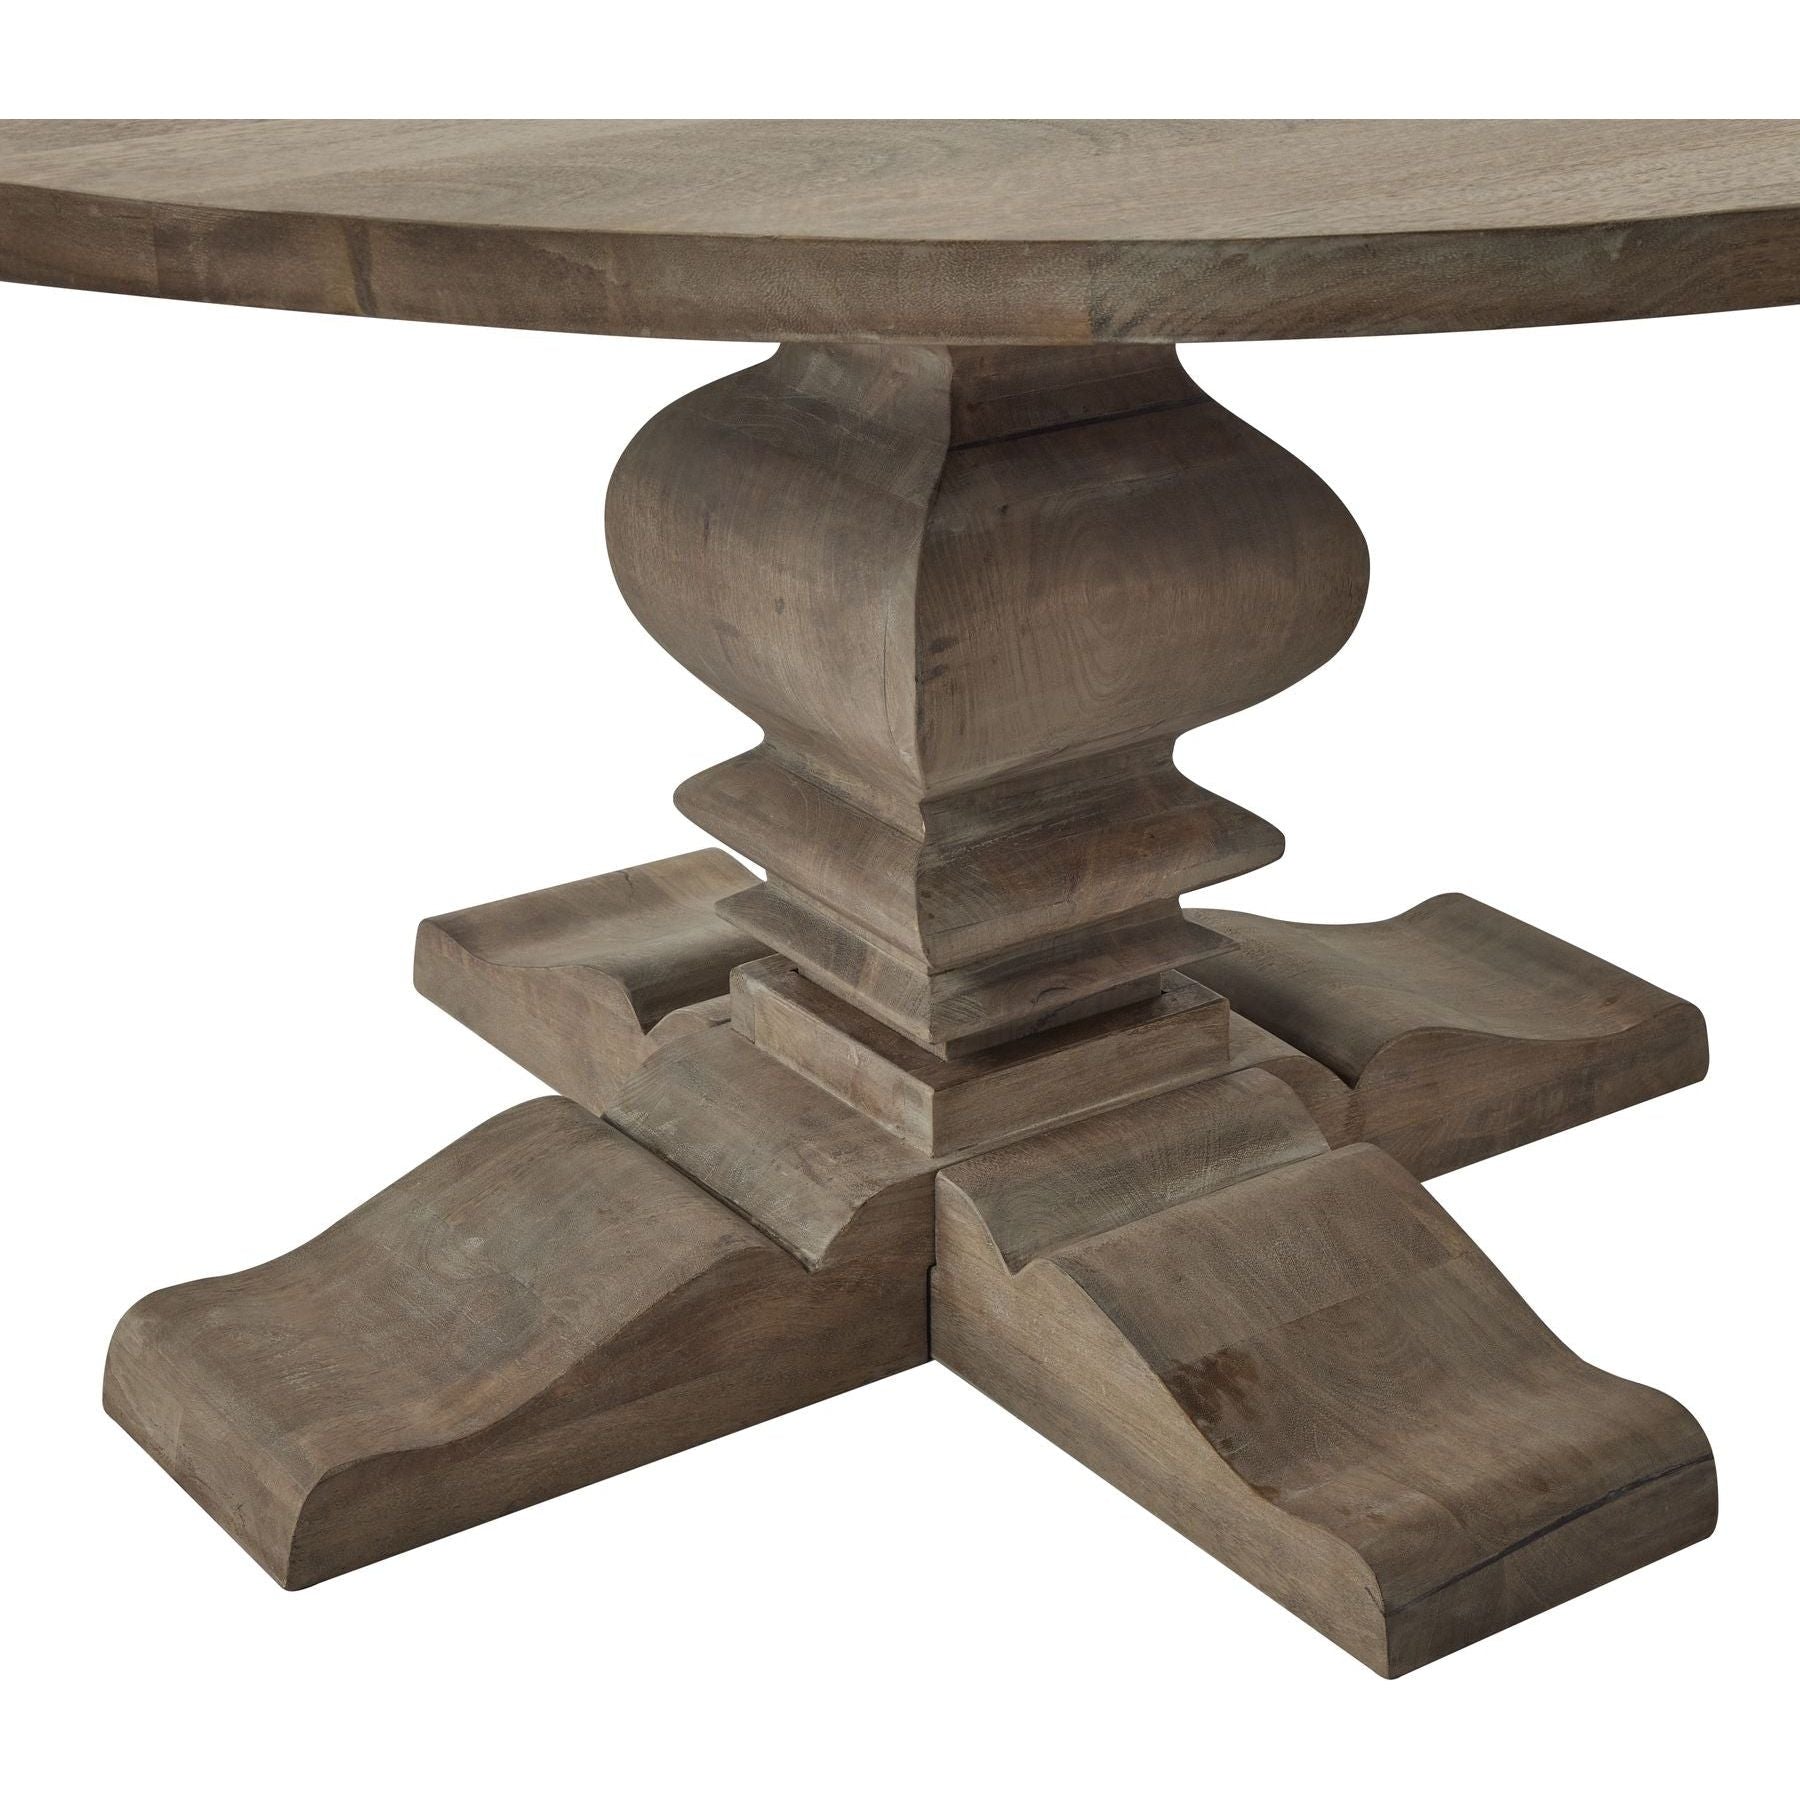 Copgrove Collection Round Pedestal Dining Table - Ashton and Finch